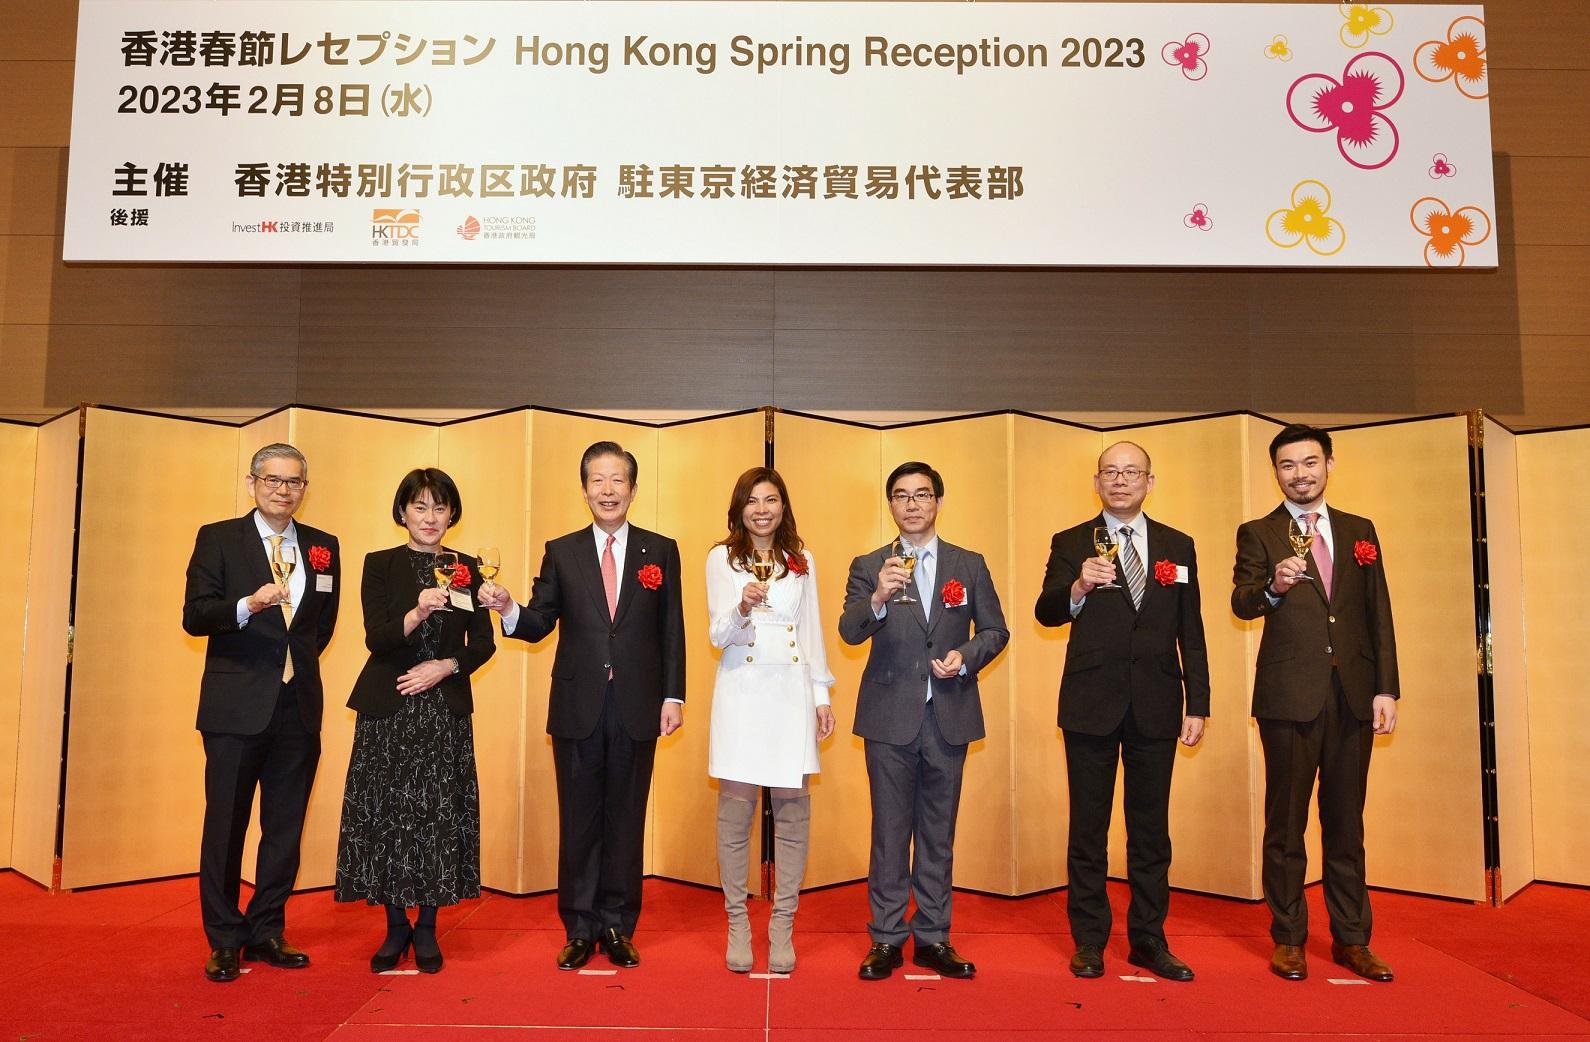 The Hong Kong Economic and Trade Office (Tokyo) organised a spring reception in Tokyo today (February 8). Photo shows the Acting Principal Hong Kong Economic and Trade Representative (Tokyo), Miss Winsome Au (centre), pictured with (from left) the Regional Director of Japan of the Hong Kong Tourism Board, Mr Kazunori Hori; the Head of Business and Talent Attraction/Investment Promotion of Tokyo ETO, Ms Kiyoko Hashiba; the Chief Representative of Japan's Komeito Party, Mr Natsuo Yamaguchi; the Minister of the Embassy of the People's Republic of China in Japan, Mr Shi Yong; the Director, Japan, of the Hong Kong Trade Development Council, Mr Benjamin Yau; and the Deputy Hong Kong Economic and Trade Representative (Tokyo), Mr Andrew Fan.